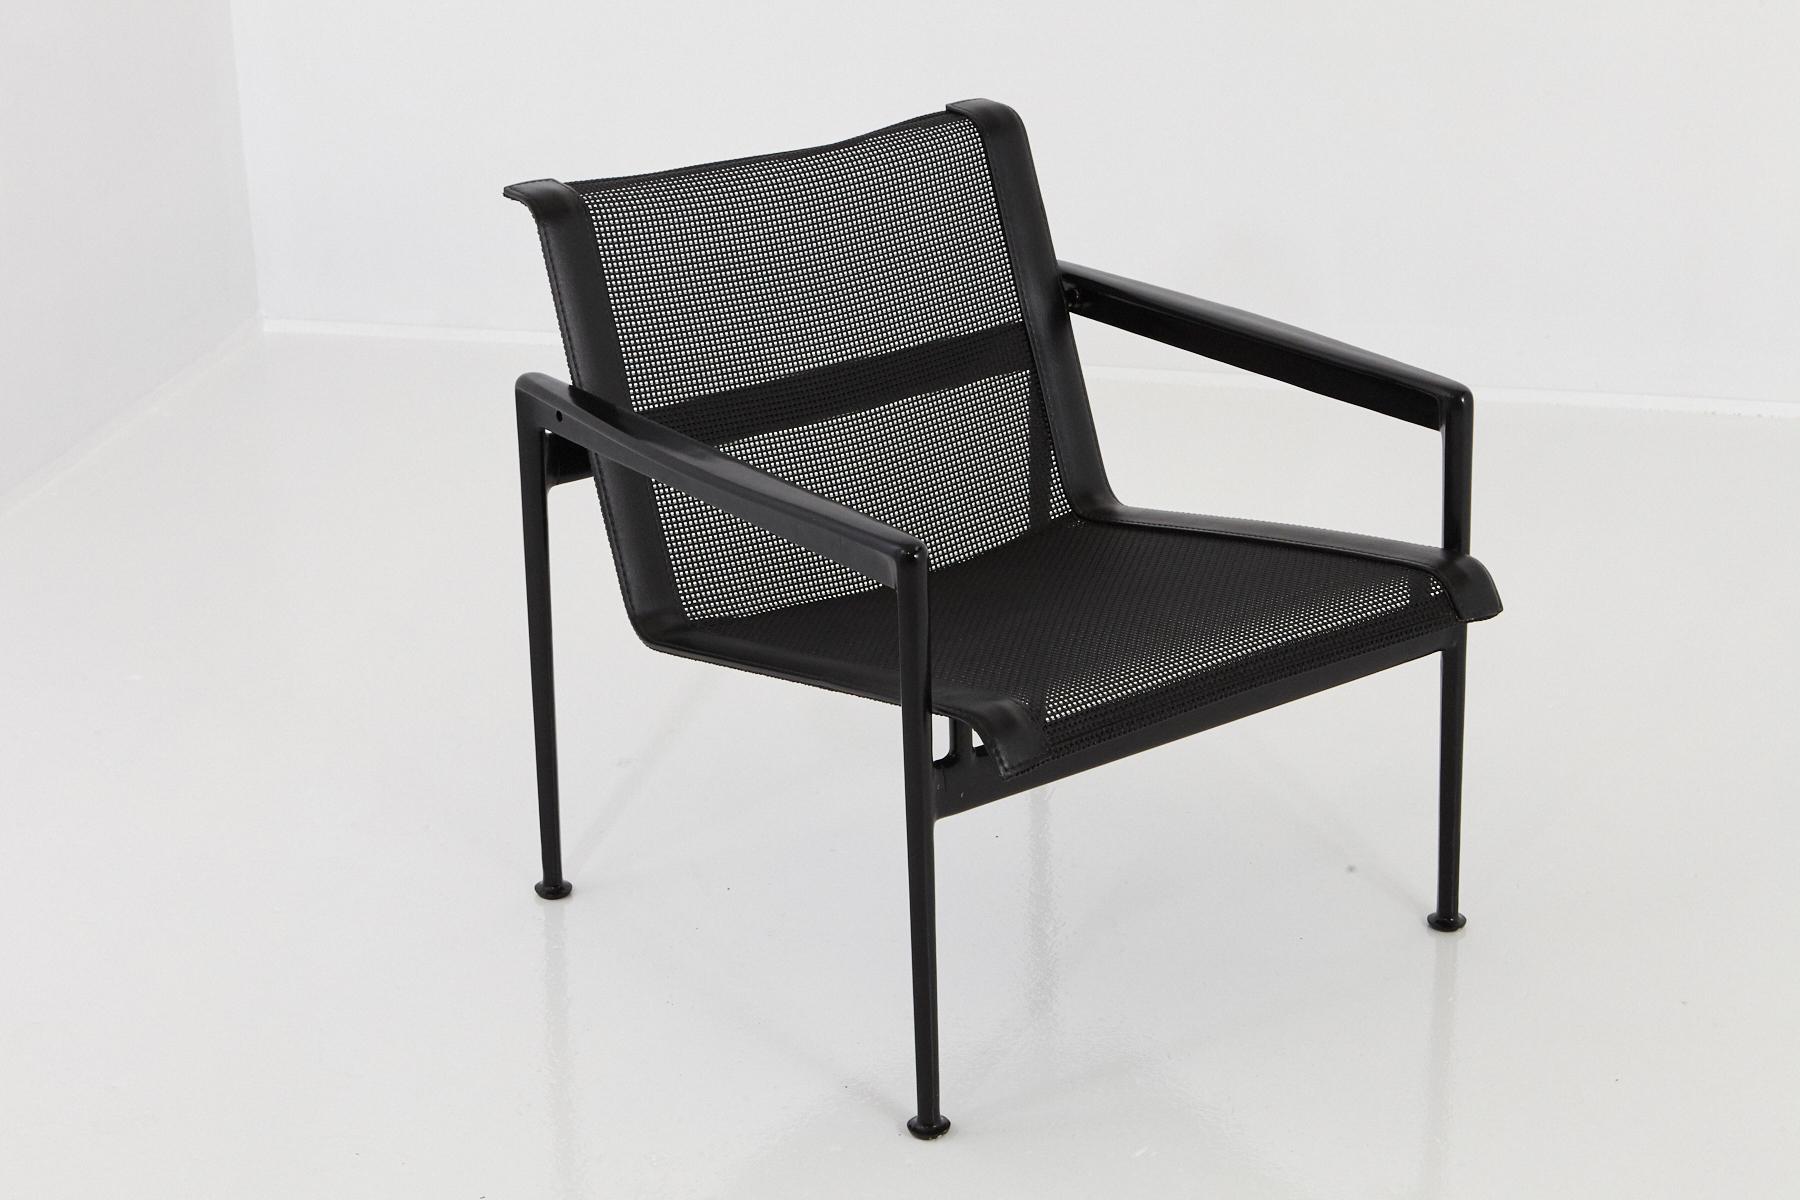 Richard Schultz designed all black garden lounge chair from the 'Leisure Collection', now called the '1966 Collection'.
Weather-resistant polyester powder coating on an aluminum frame. Vinyl coated polyester mesh seats and back with solid vinyl